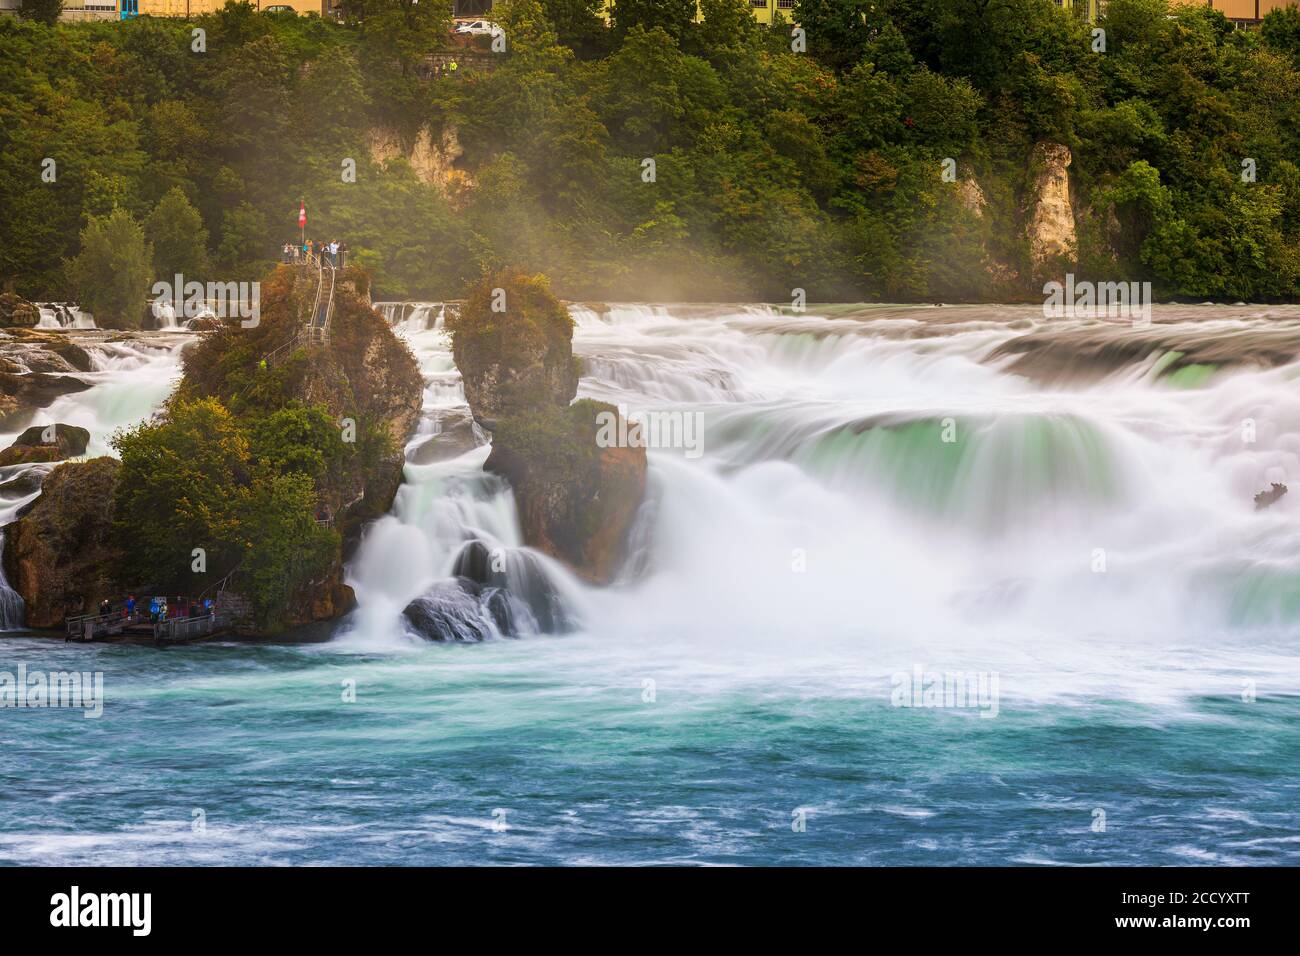 The Rhine Falls (German: Rheinfall) is the largest waterfall in Switzerland and Europe. The falls are located on the High Rhine on the border between Stock Photo